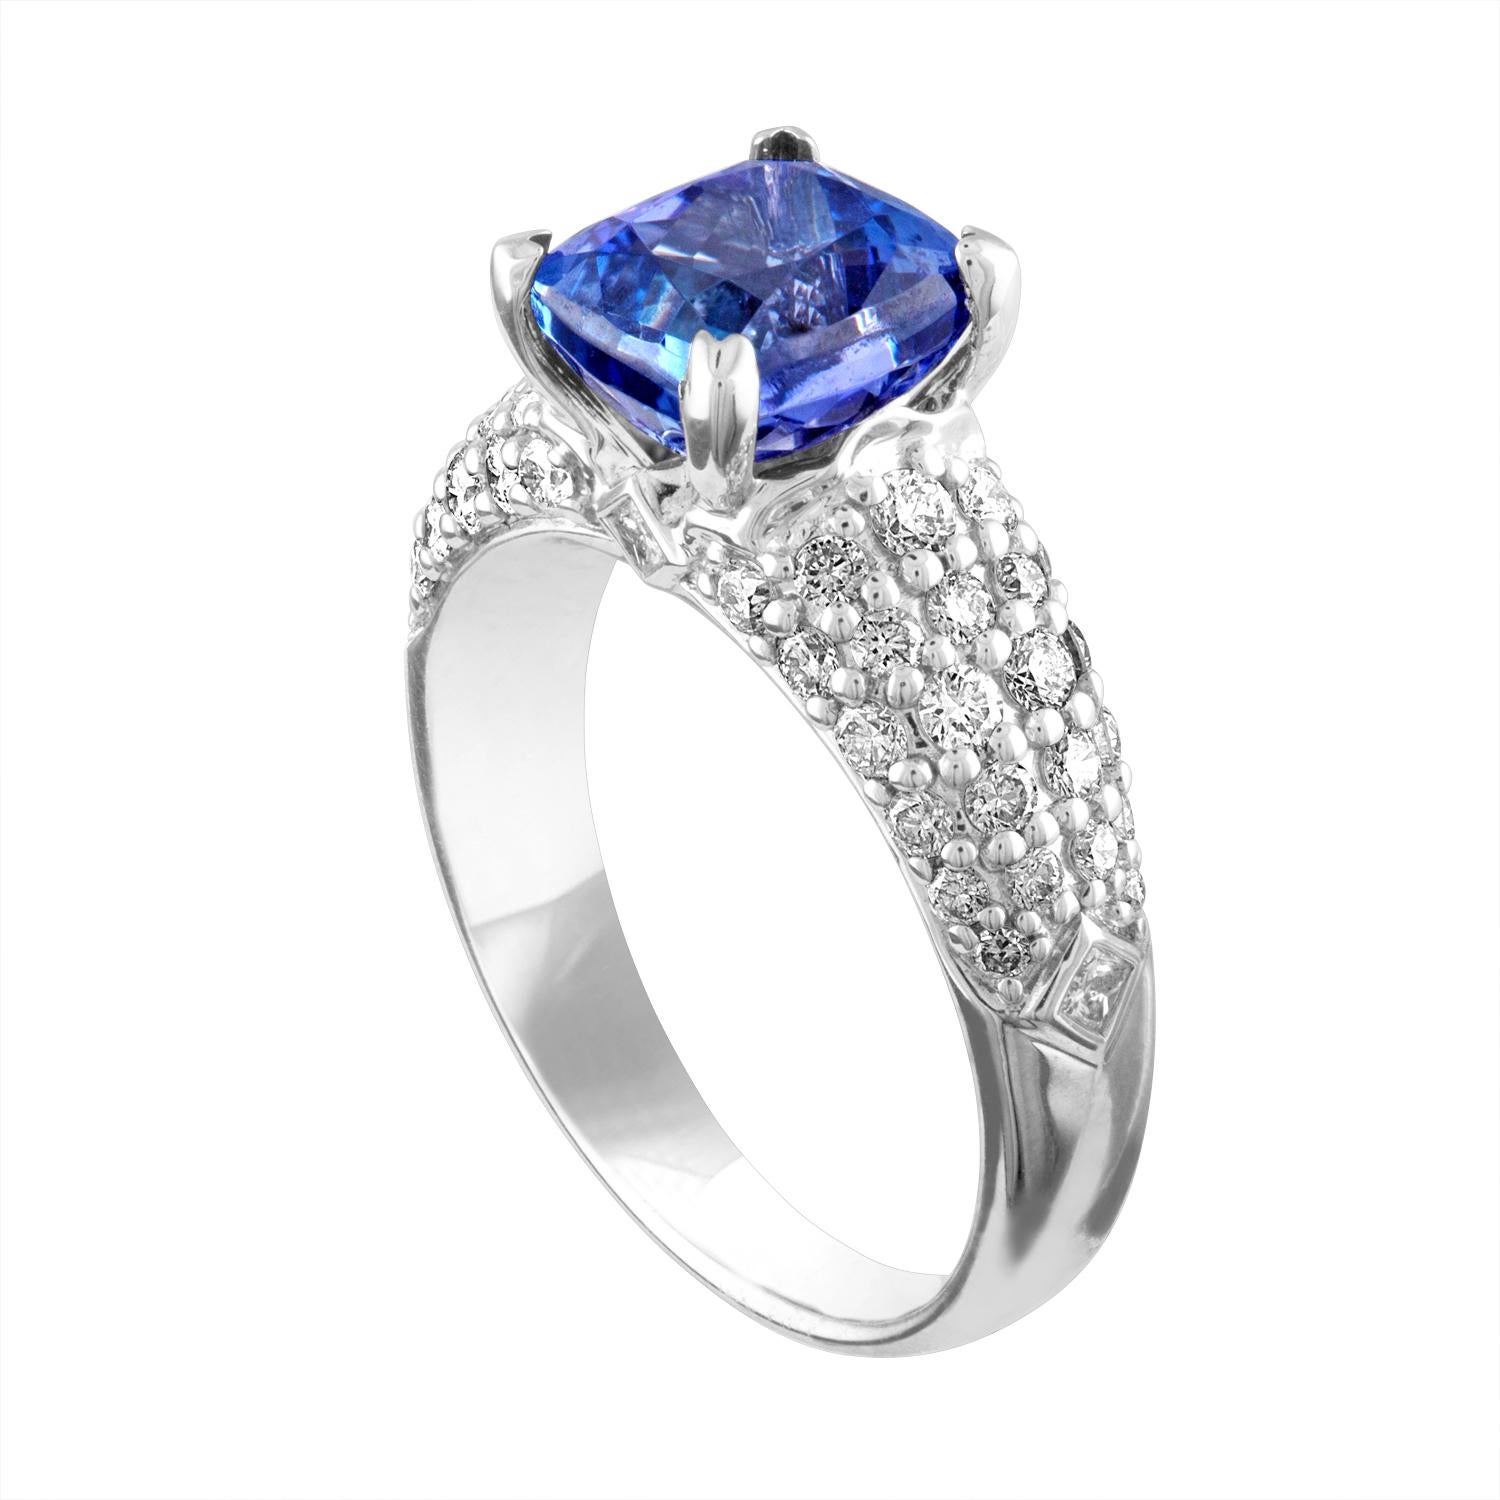 Beautiful Pave Ring
The ring is 18K White Gold
The Center Stone is a Cushion Cut Tanzanite 2.97 Carats
There are 0.99 Carats in Diamonds F/G VS/SI
The ring is a size 6.50, sizable
The ring weighs 5.3 grams